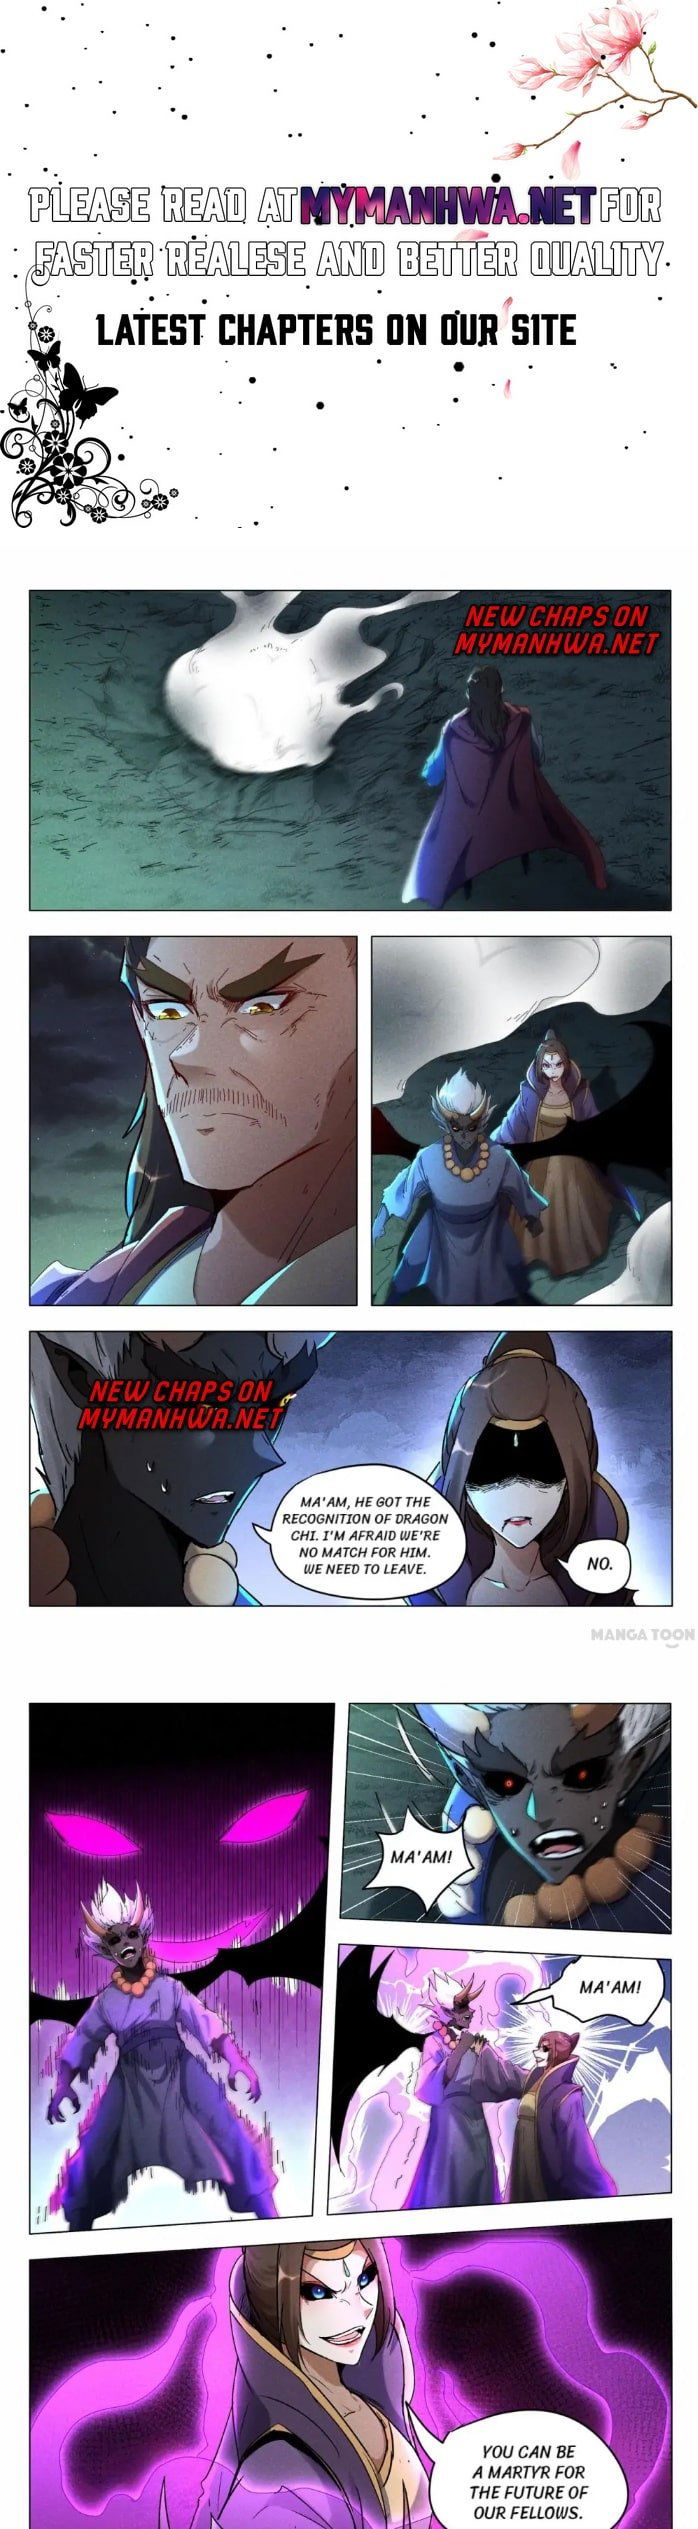 Master of Legendary Realms Chapter 437 page 1